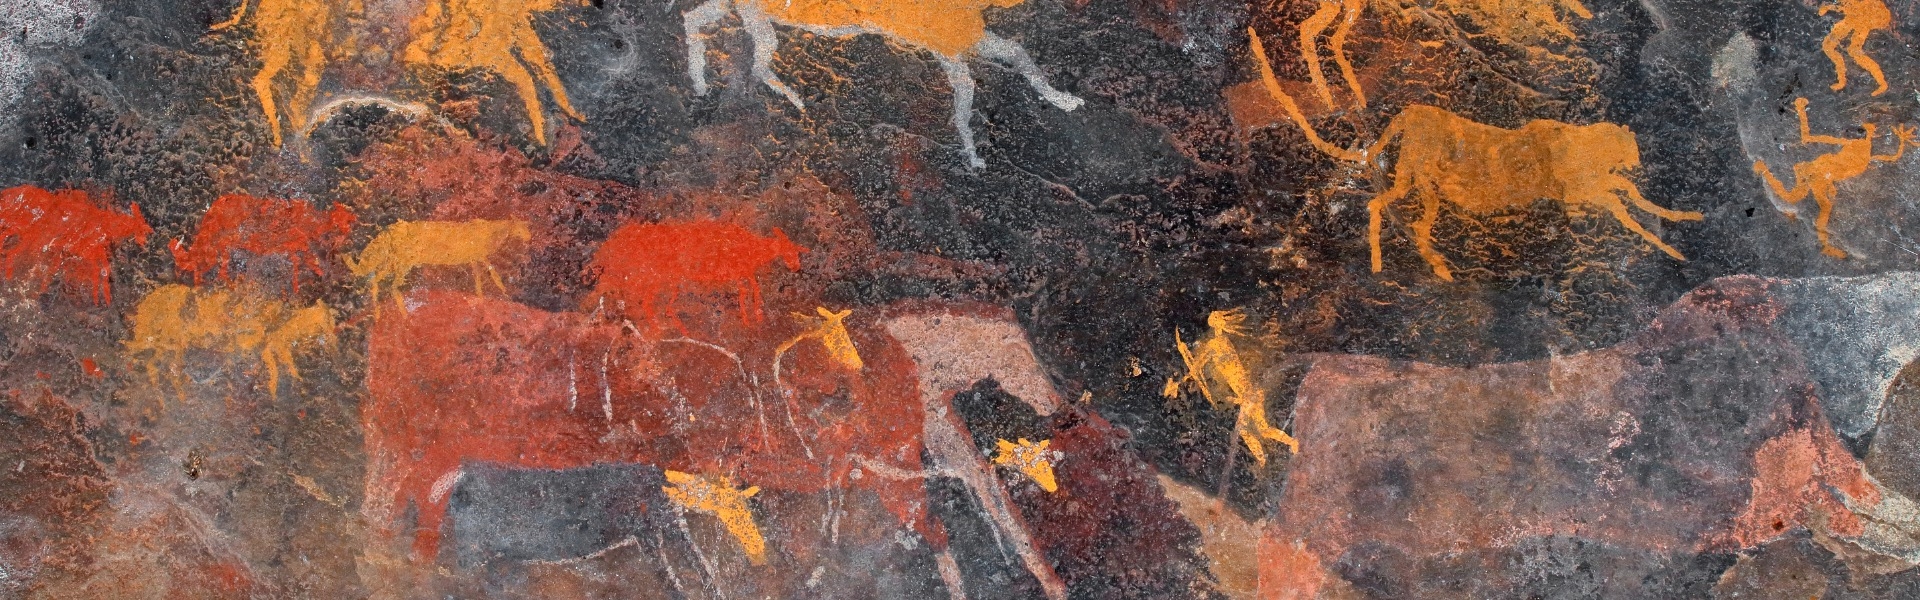 Cave drawings of horses in red and yellow